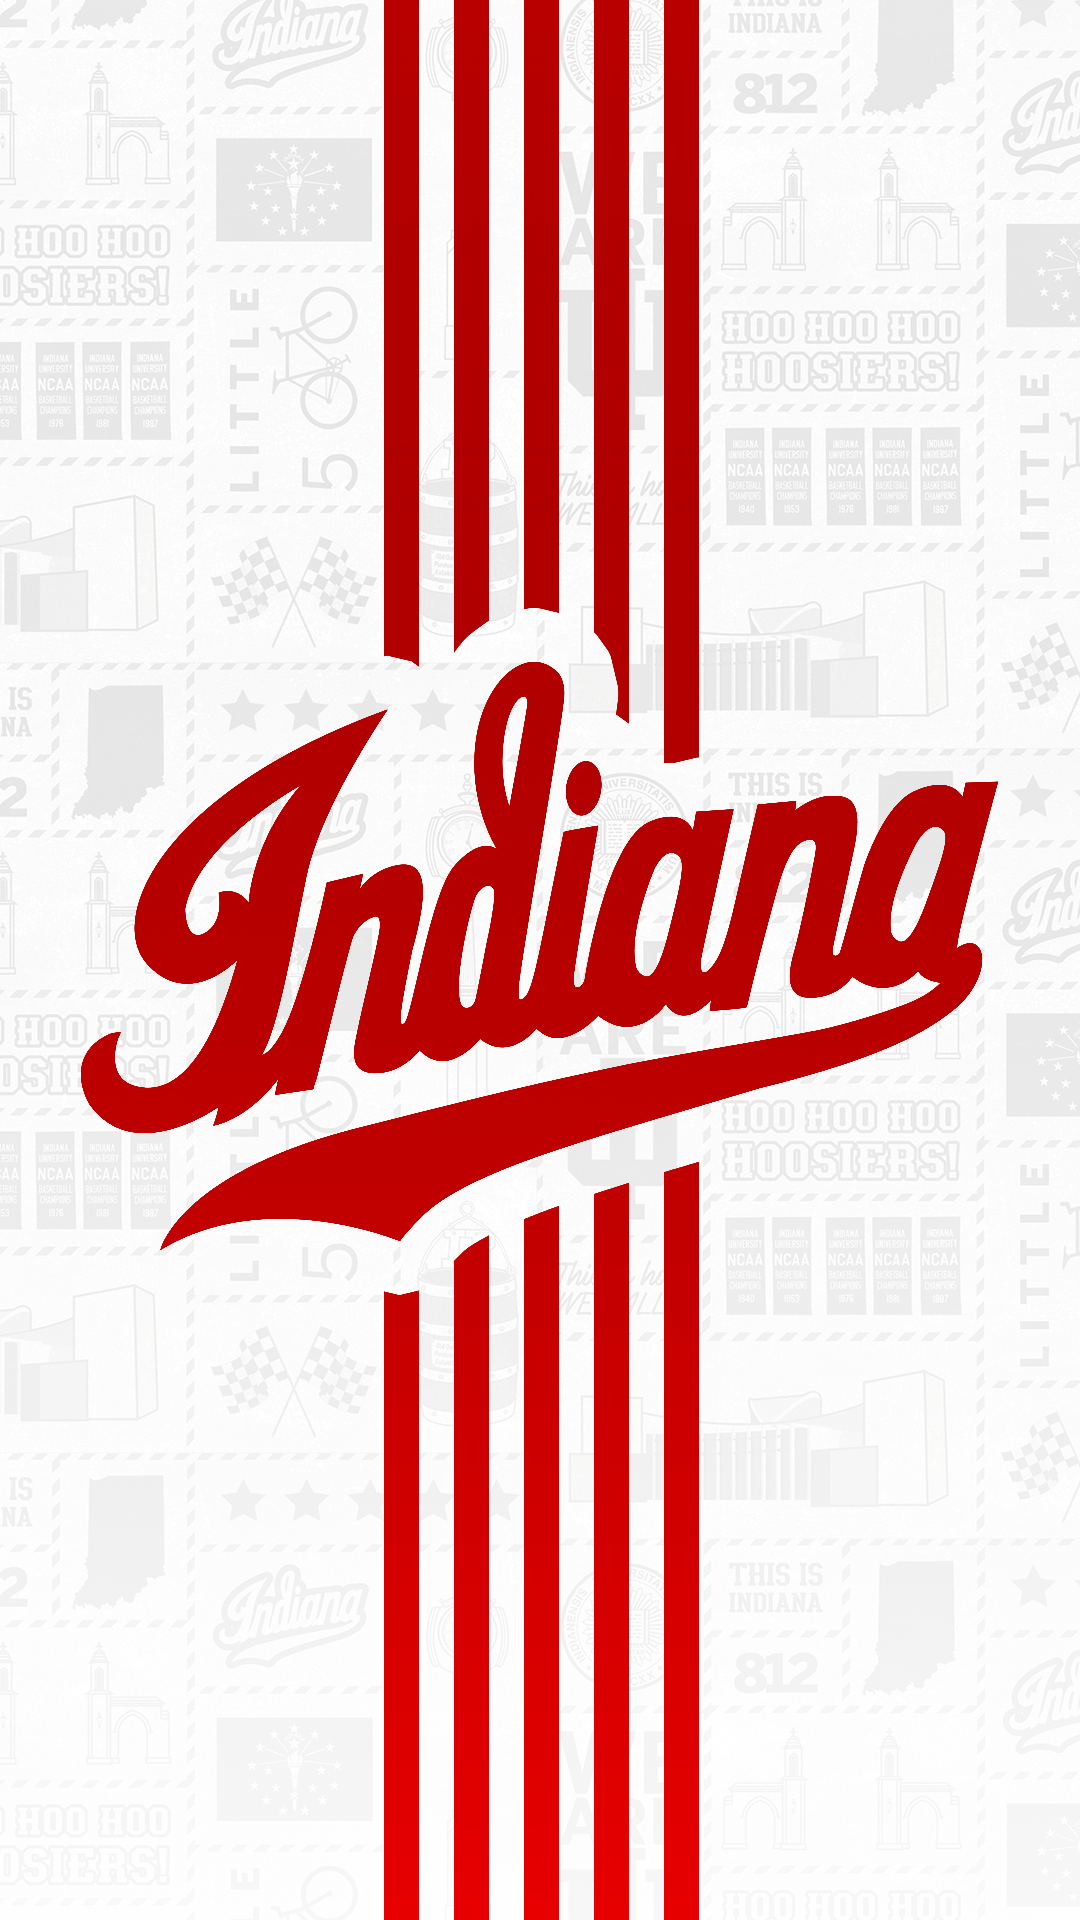 IU Bloomington on Twitter changes our phones wallpaper immediately   Twitter